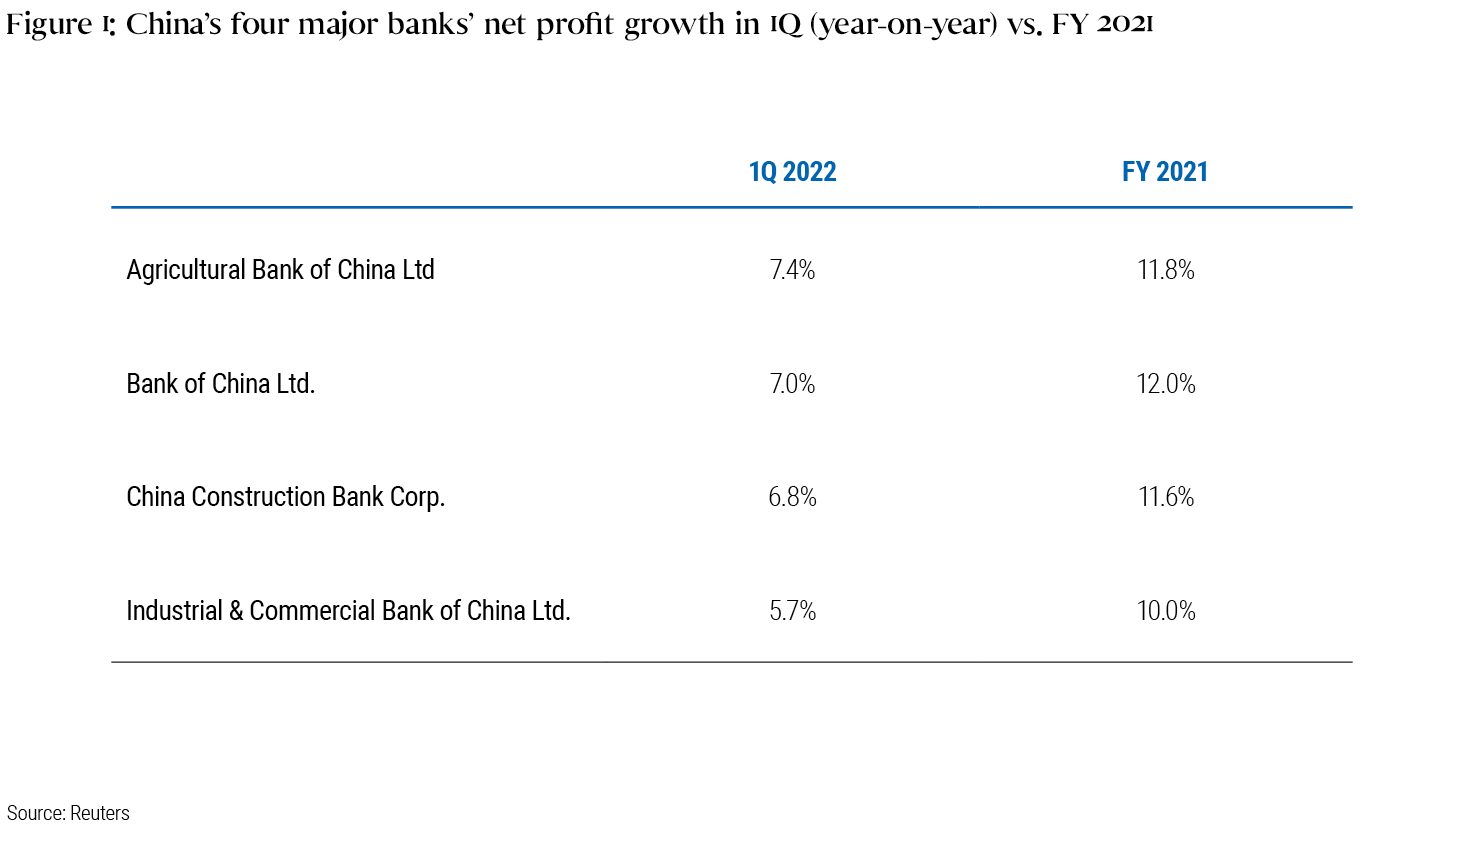 Figure 1 is a table listing the year-on-year net profit growth of China’s four major banks in the first quarter of 2022 versus financial year 2021. Agricultural Bank of China Ltd posted 7.4% in 1Q 2022 vs 11.8% in FY 2021; Bank of China Ltd 7.0% vs 12.0%; China Construction Bank Corp 6.8% vs 11.6%; and Industrial & Commercial Bank of China Ltd 5.7% vs 10.0%. Data is within the table and the source of the data is Reuters.